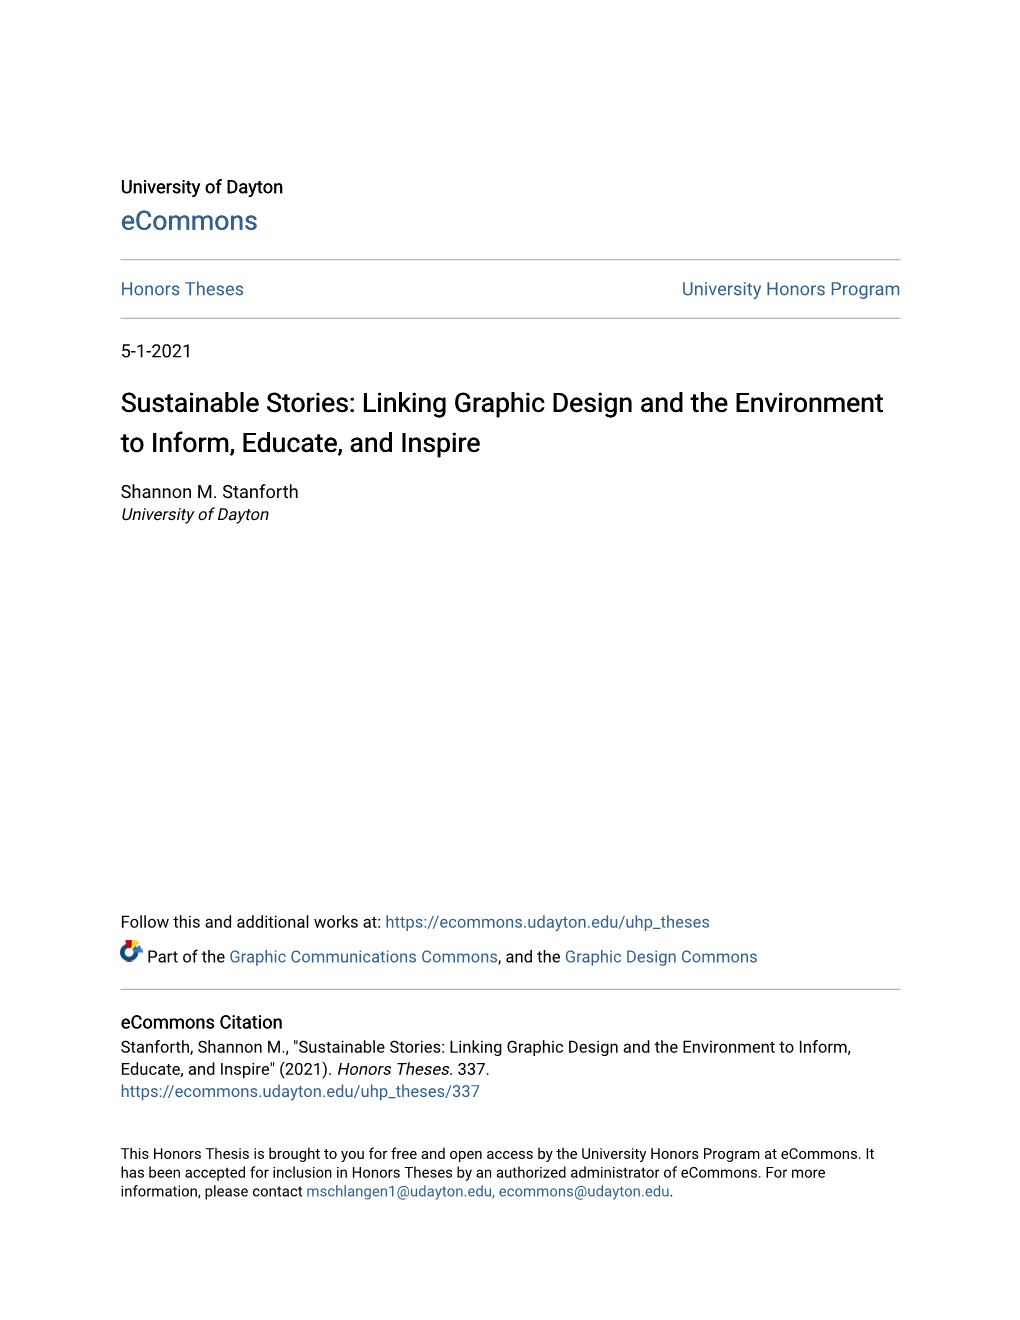 Sustainable Stories: Linking Graphic Design and the Environment to Inform, Educate, and Inspire